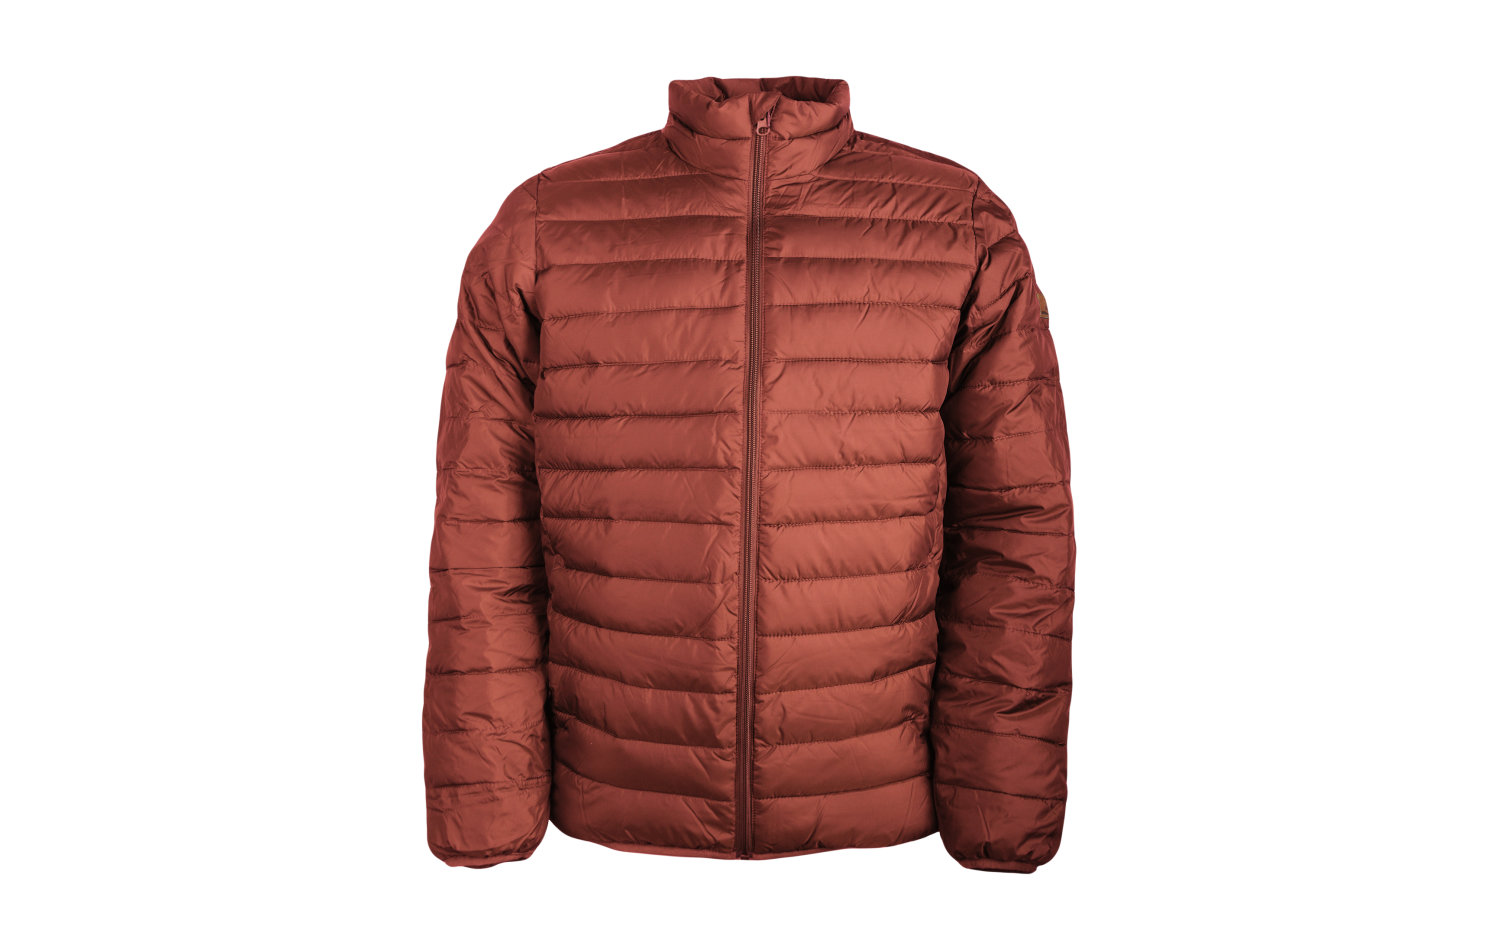 Quiksilver Scaly Jacket (EQYJK03503-RSD0)